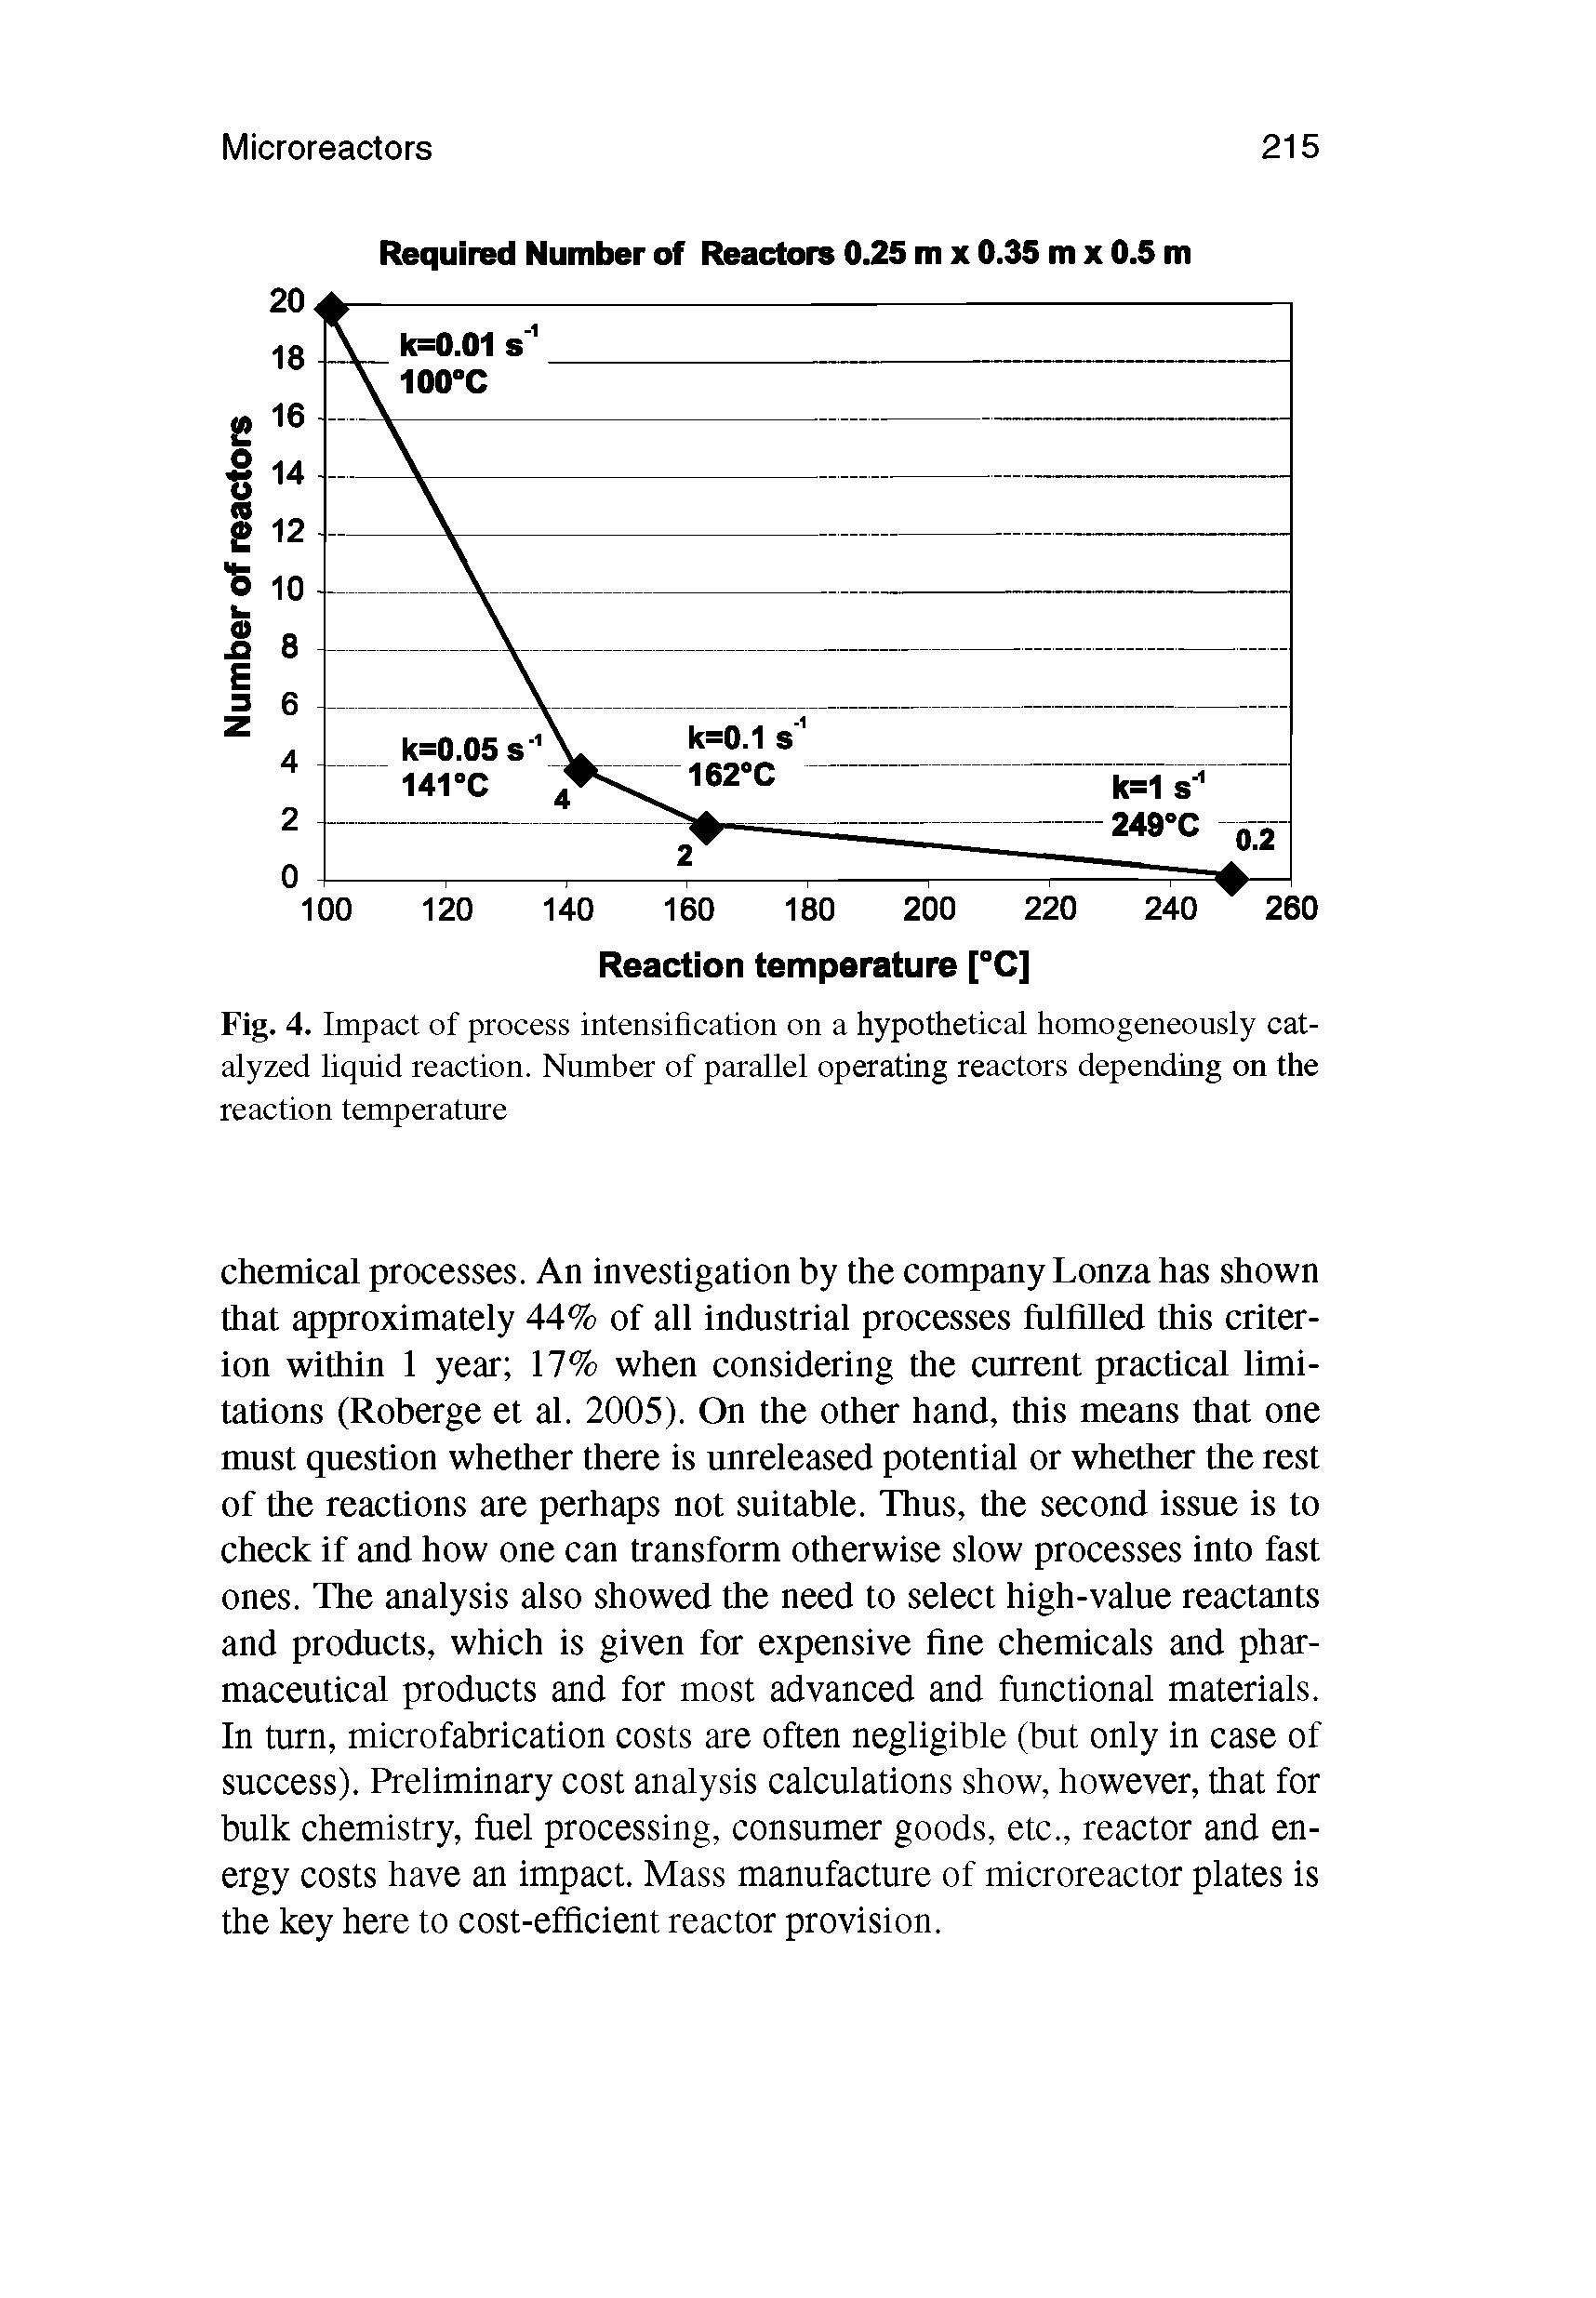 Fig. 4. Impact of process intensification on a hypothetical homogeneously catalyzed liquid reaction. Number of parallel operating reactors depending on the reaction temperature...